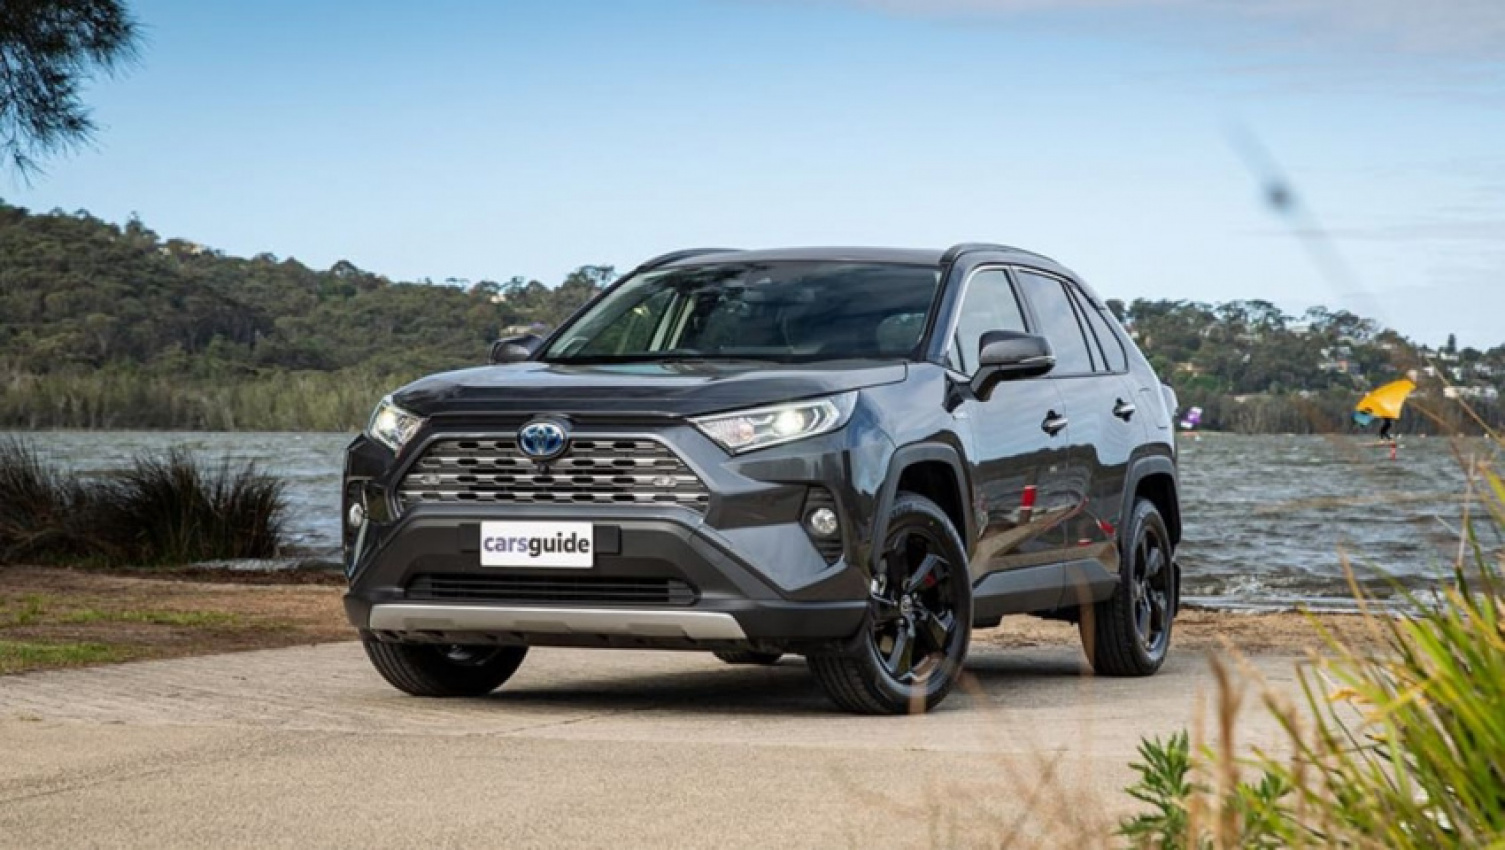 autos, cars, ford, mitsubishi, toyota, commercial, ford commercial range, ford hatchback range, ford news, ford ranger, ford ranger 2022, ford sedan range, ford suv range, ford ute range, hatchback, hyundai commercial range, hyundai hatchback range, hyundai i30, hyundai i30 2022, hyundai news, hyundai sedan range, hyundai suv range, industry news, isuzu commercial range, isuzu d-max, isuzu d-max 2022, isuzu news, isuzu sedan range, isuzu suv range, isuzu ute range, mazda commercial range, mazda cx-30, mazda cx-30 2022, mazda hatchback range, mazda news, mazda sedan range, mazda suv range, mazda ute range, mg hatchback range, mg sedan range, mg suv range, mg zs 2022, mitsubishi commercial range, mitsubishi hatchback range, mitsubishi news, mitsubishi outlander, mitsubishi outlander 2022, mitsubishi sedan range, mitsubishi suv range, mitsubishi triton, mitsubishi triton 2022, mitsubishi ute range, showroom news, toyota commercial range, toyota hatchback range, toyota hilux, toyota hilux 2022, toyota land cruiser prado, toyota landcruiser prado 2022, toyota news, toyota rav4, toyota rav4 2022, toyota sedan range, toyota suv range, toyota ute range, toyota rav4, mitsubishi triton top ford ranger as supply chain issues continue to bite australian new-car sales in february